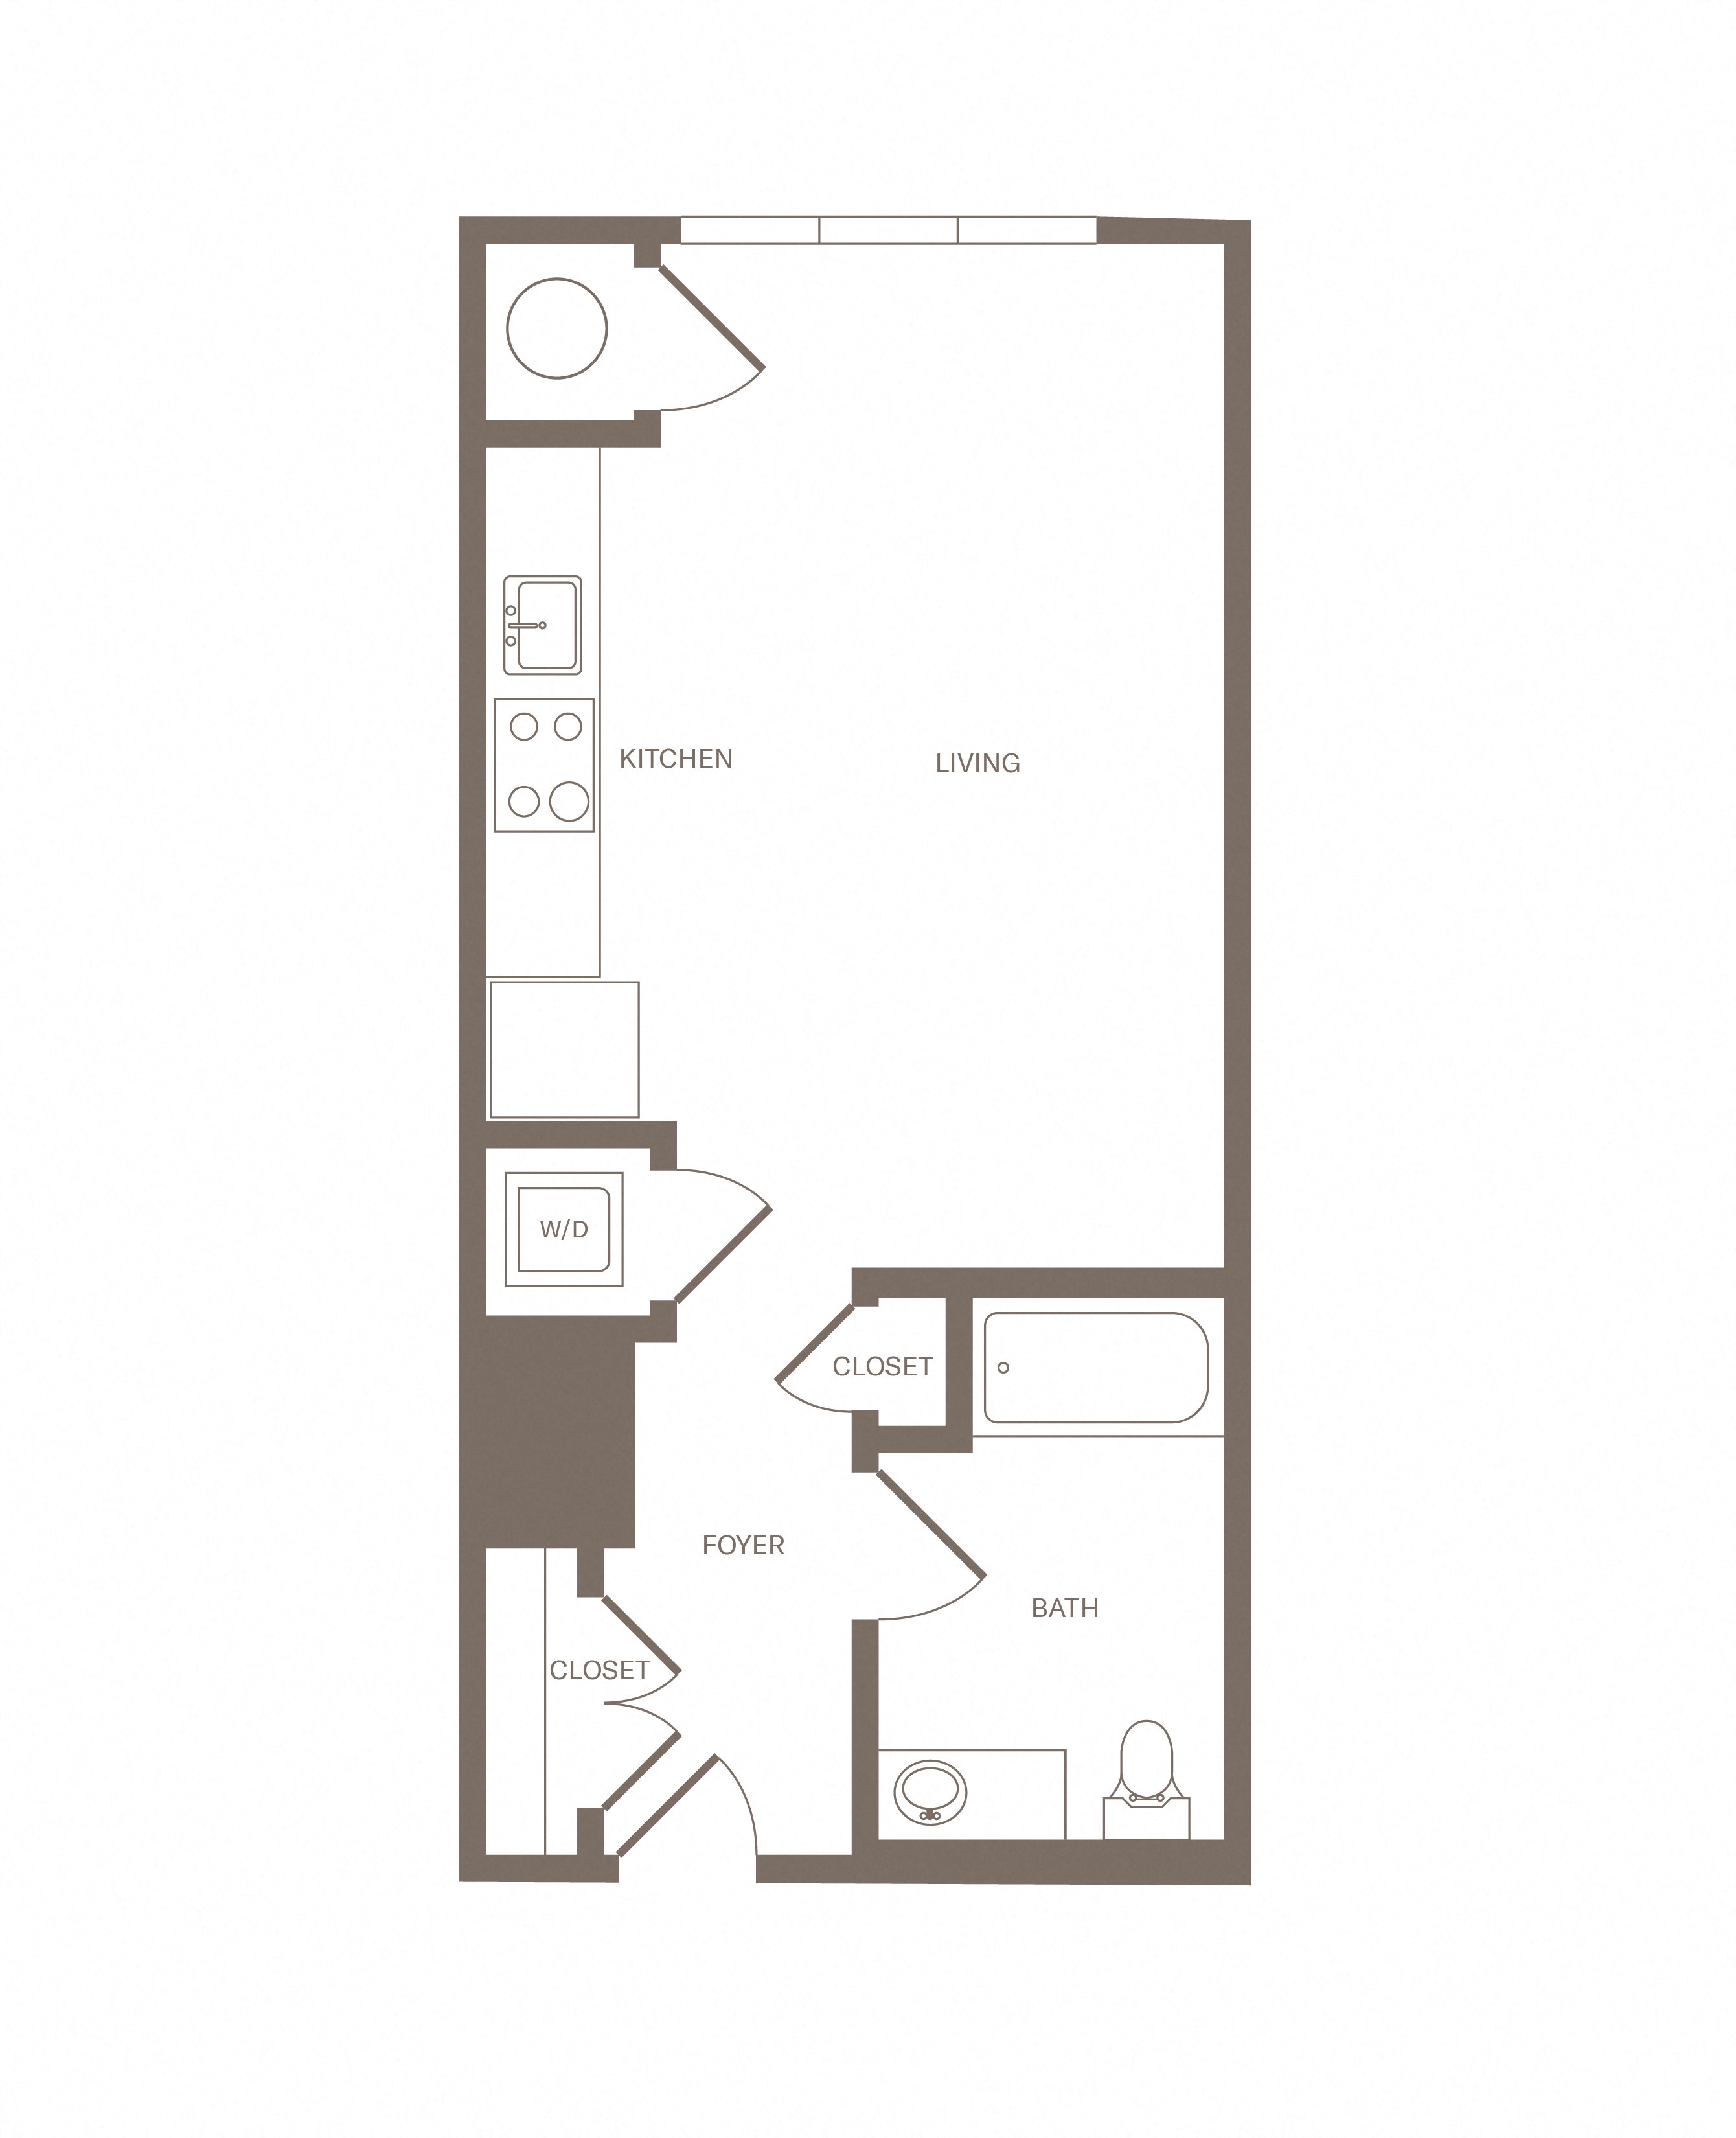 Floorplan for Apartment #1206, 0 bedroom unit at Halstead Parsippany